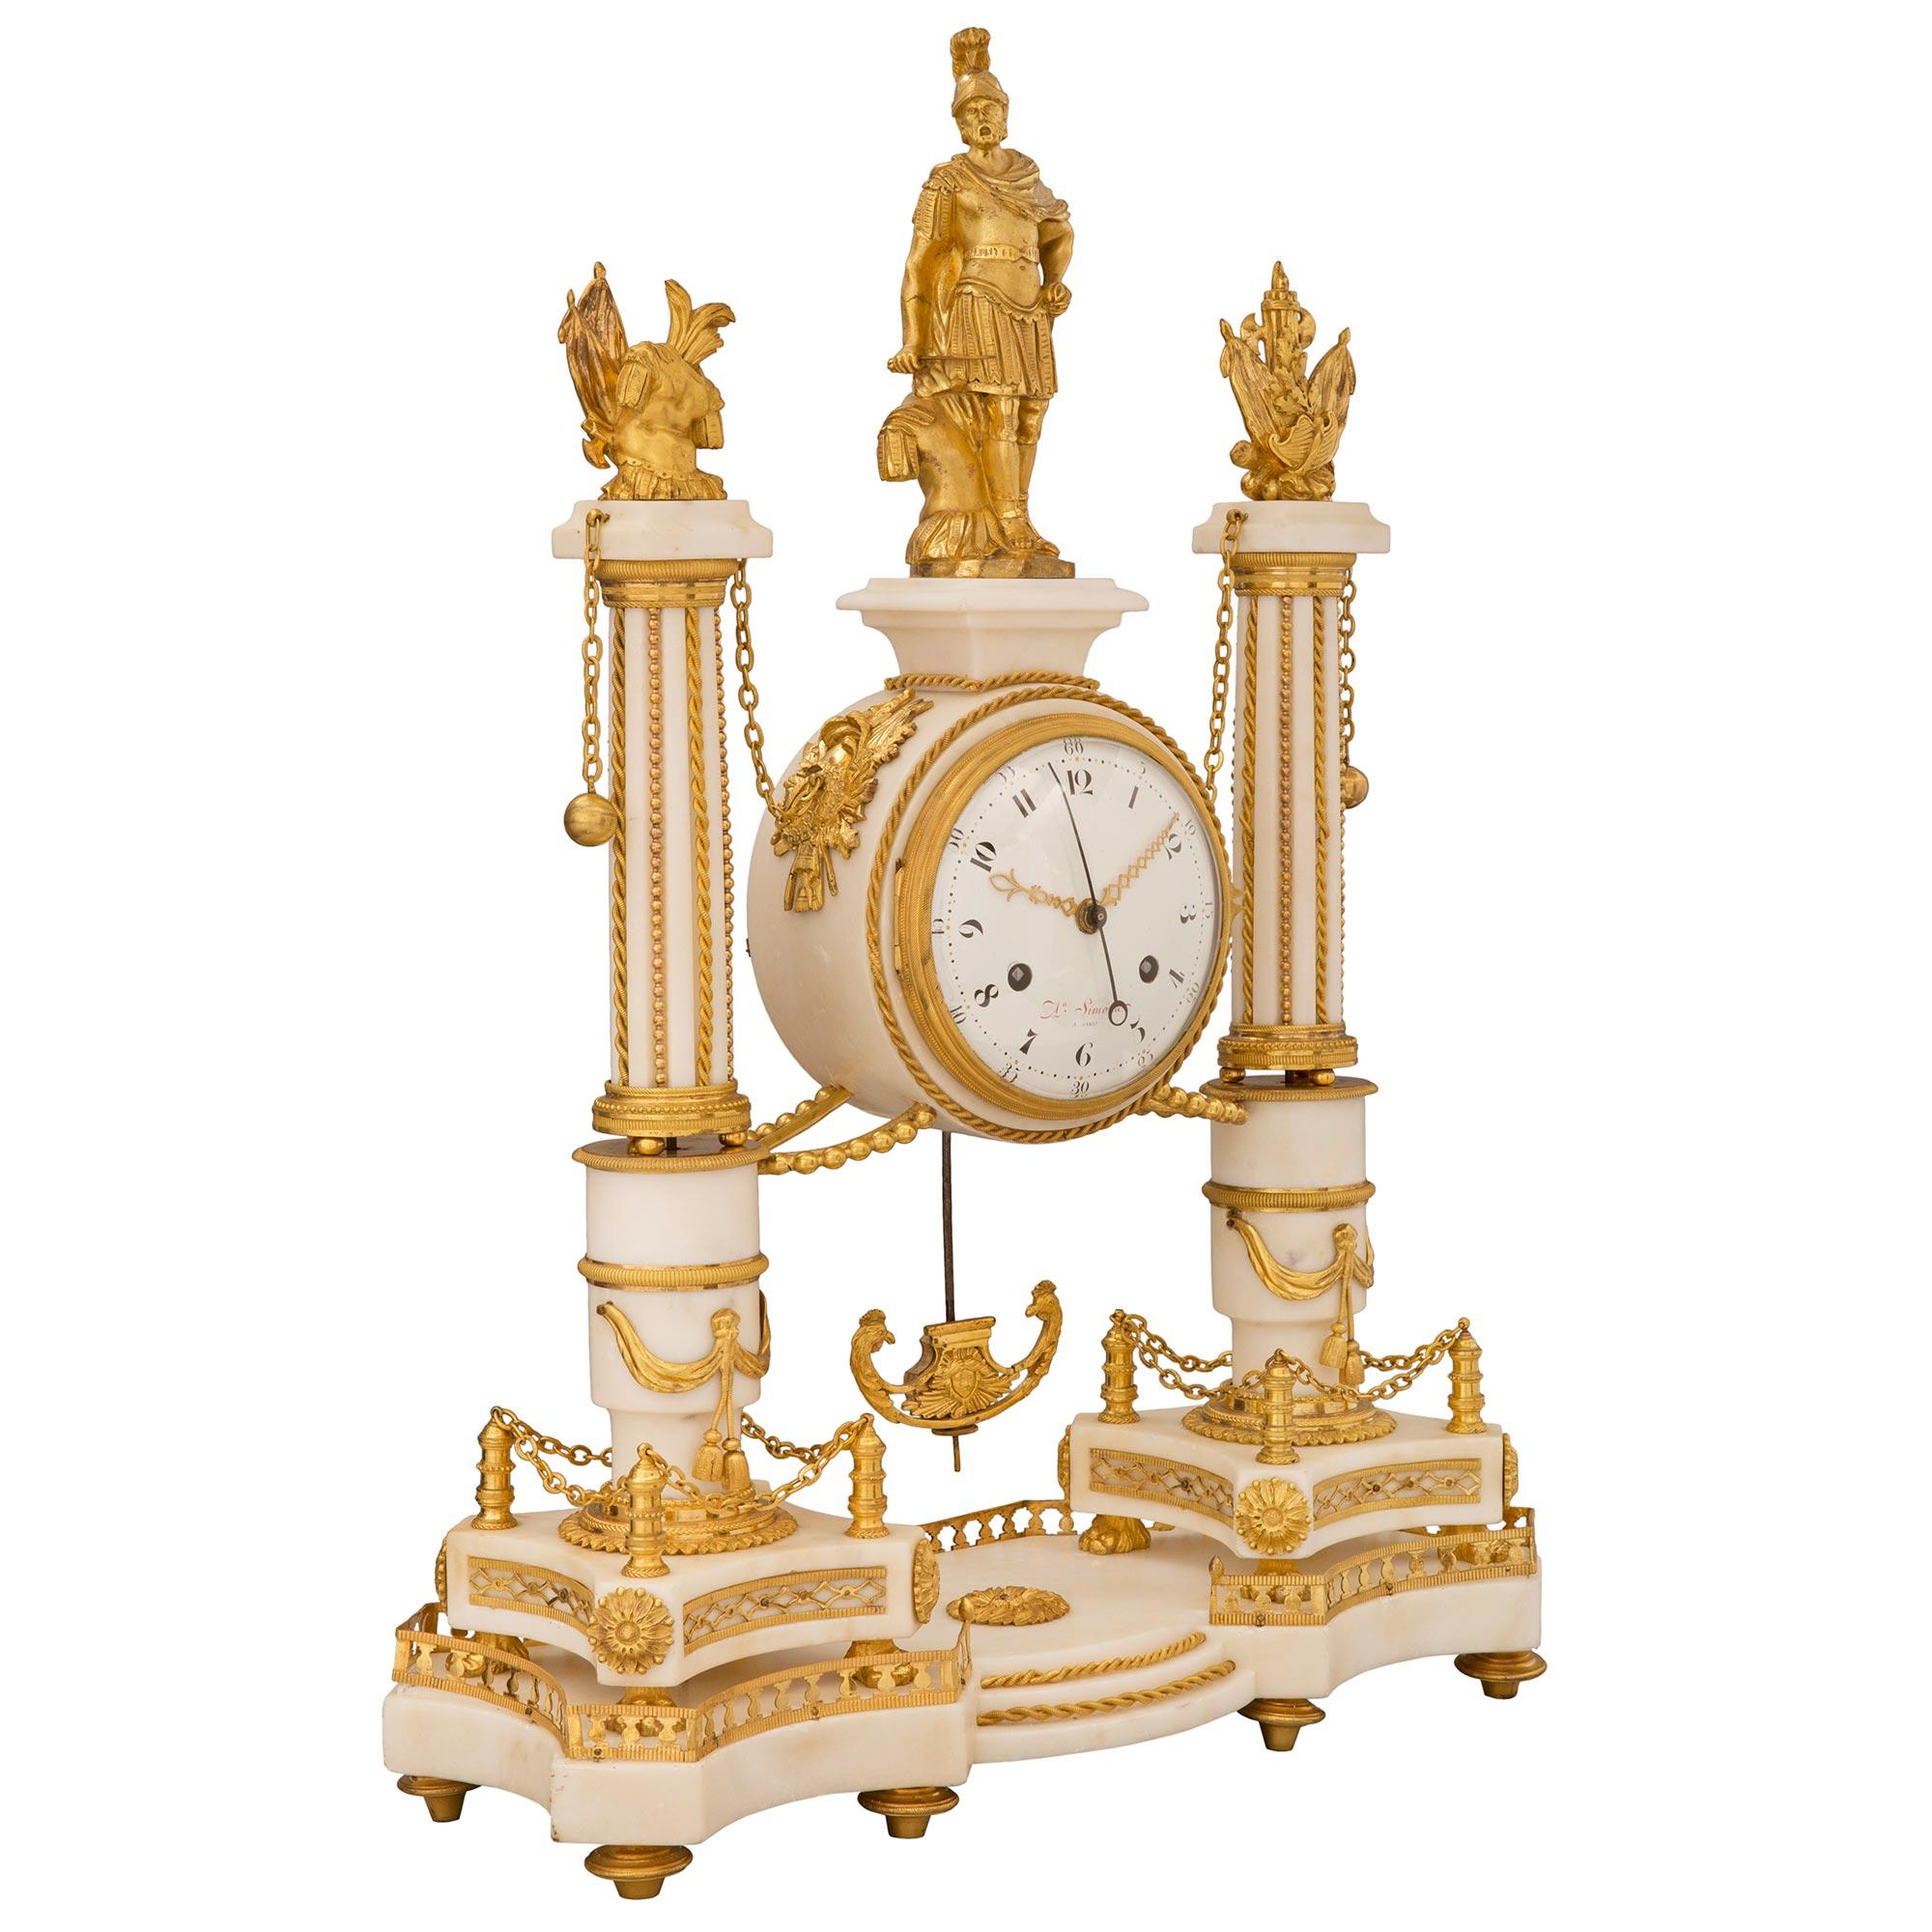 A spectacular and extremely high quality French early 19th century Louis XVI st. white Carrara marble and ormolu clock, signed Simona à Paris, circa 1819. The clock is raised by six elegant topie shaped feet below the exceptional and most decorative